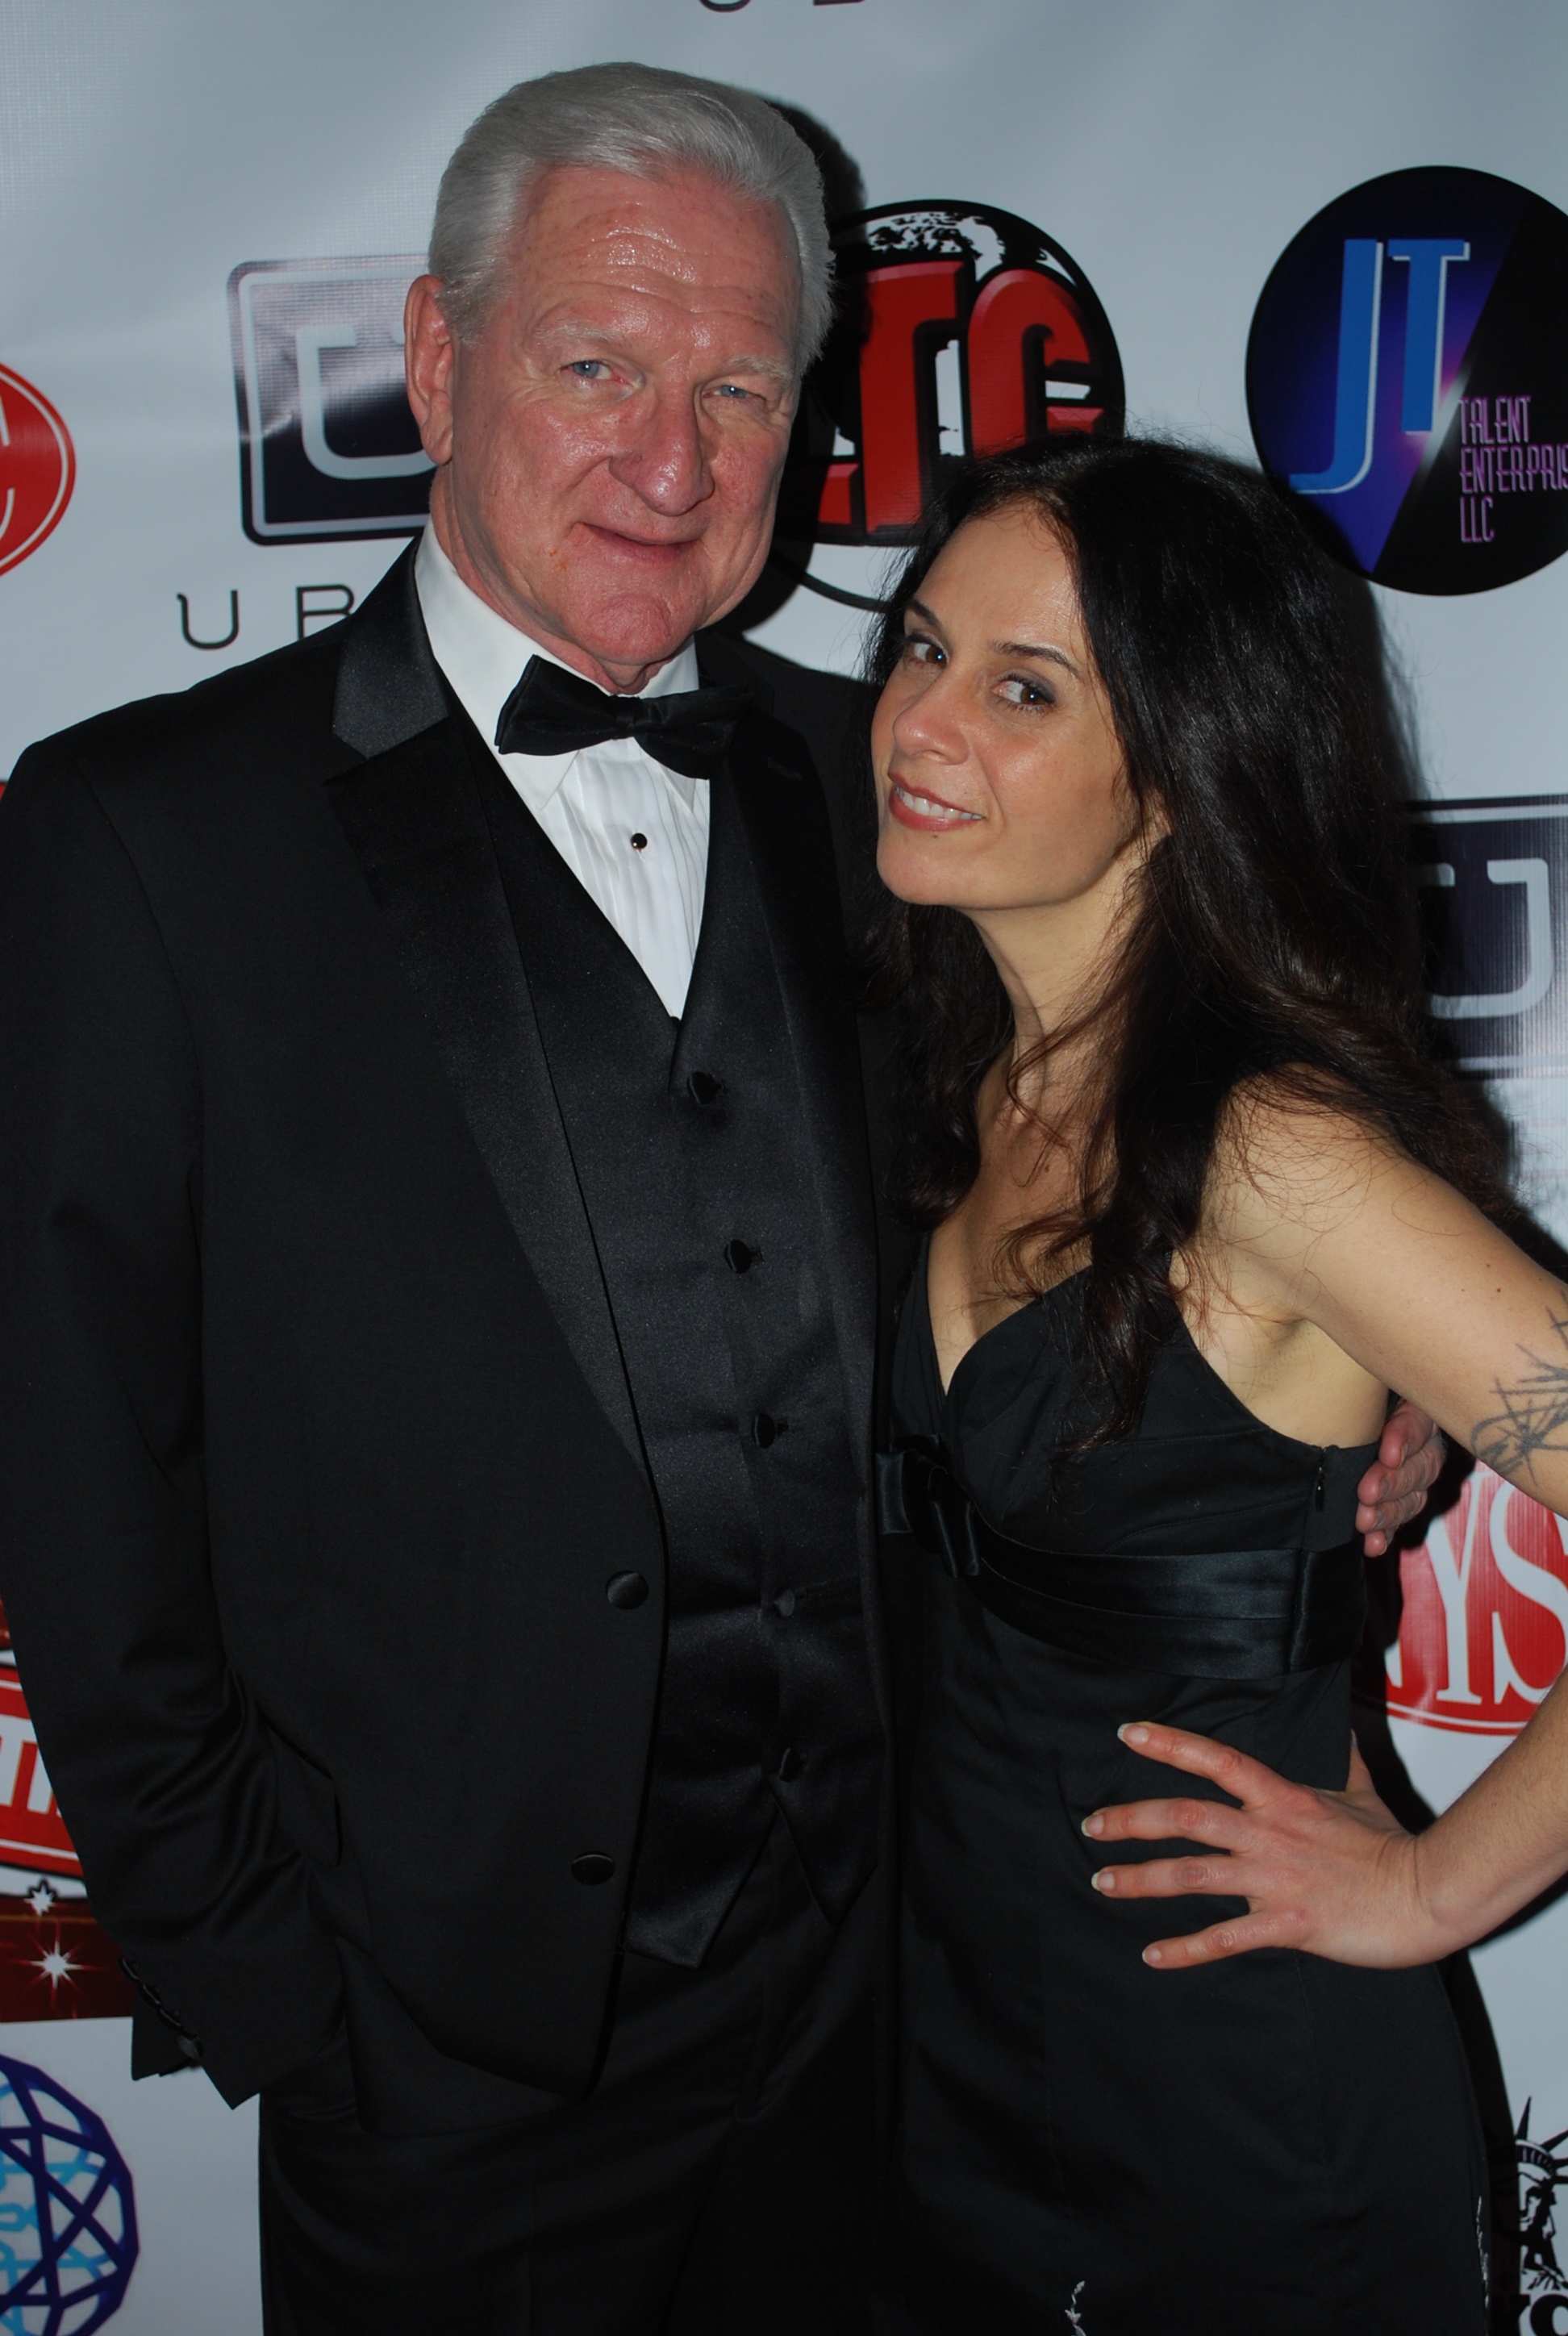 Local Talent Connection Red Carpet Christmas Party, New York 2014 with Gregory M. Brown and Valentine Aprile